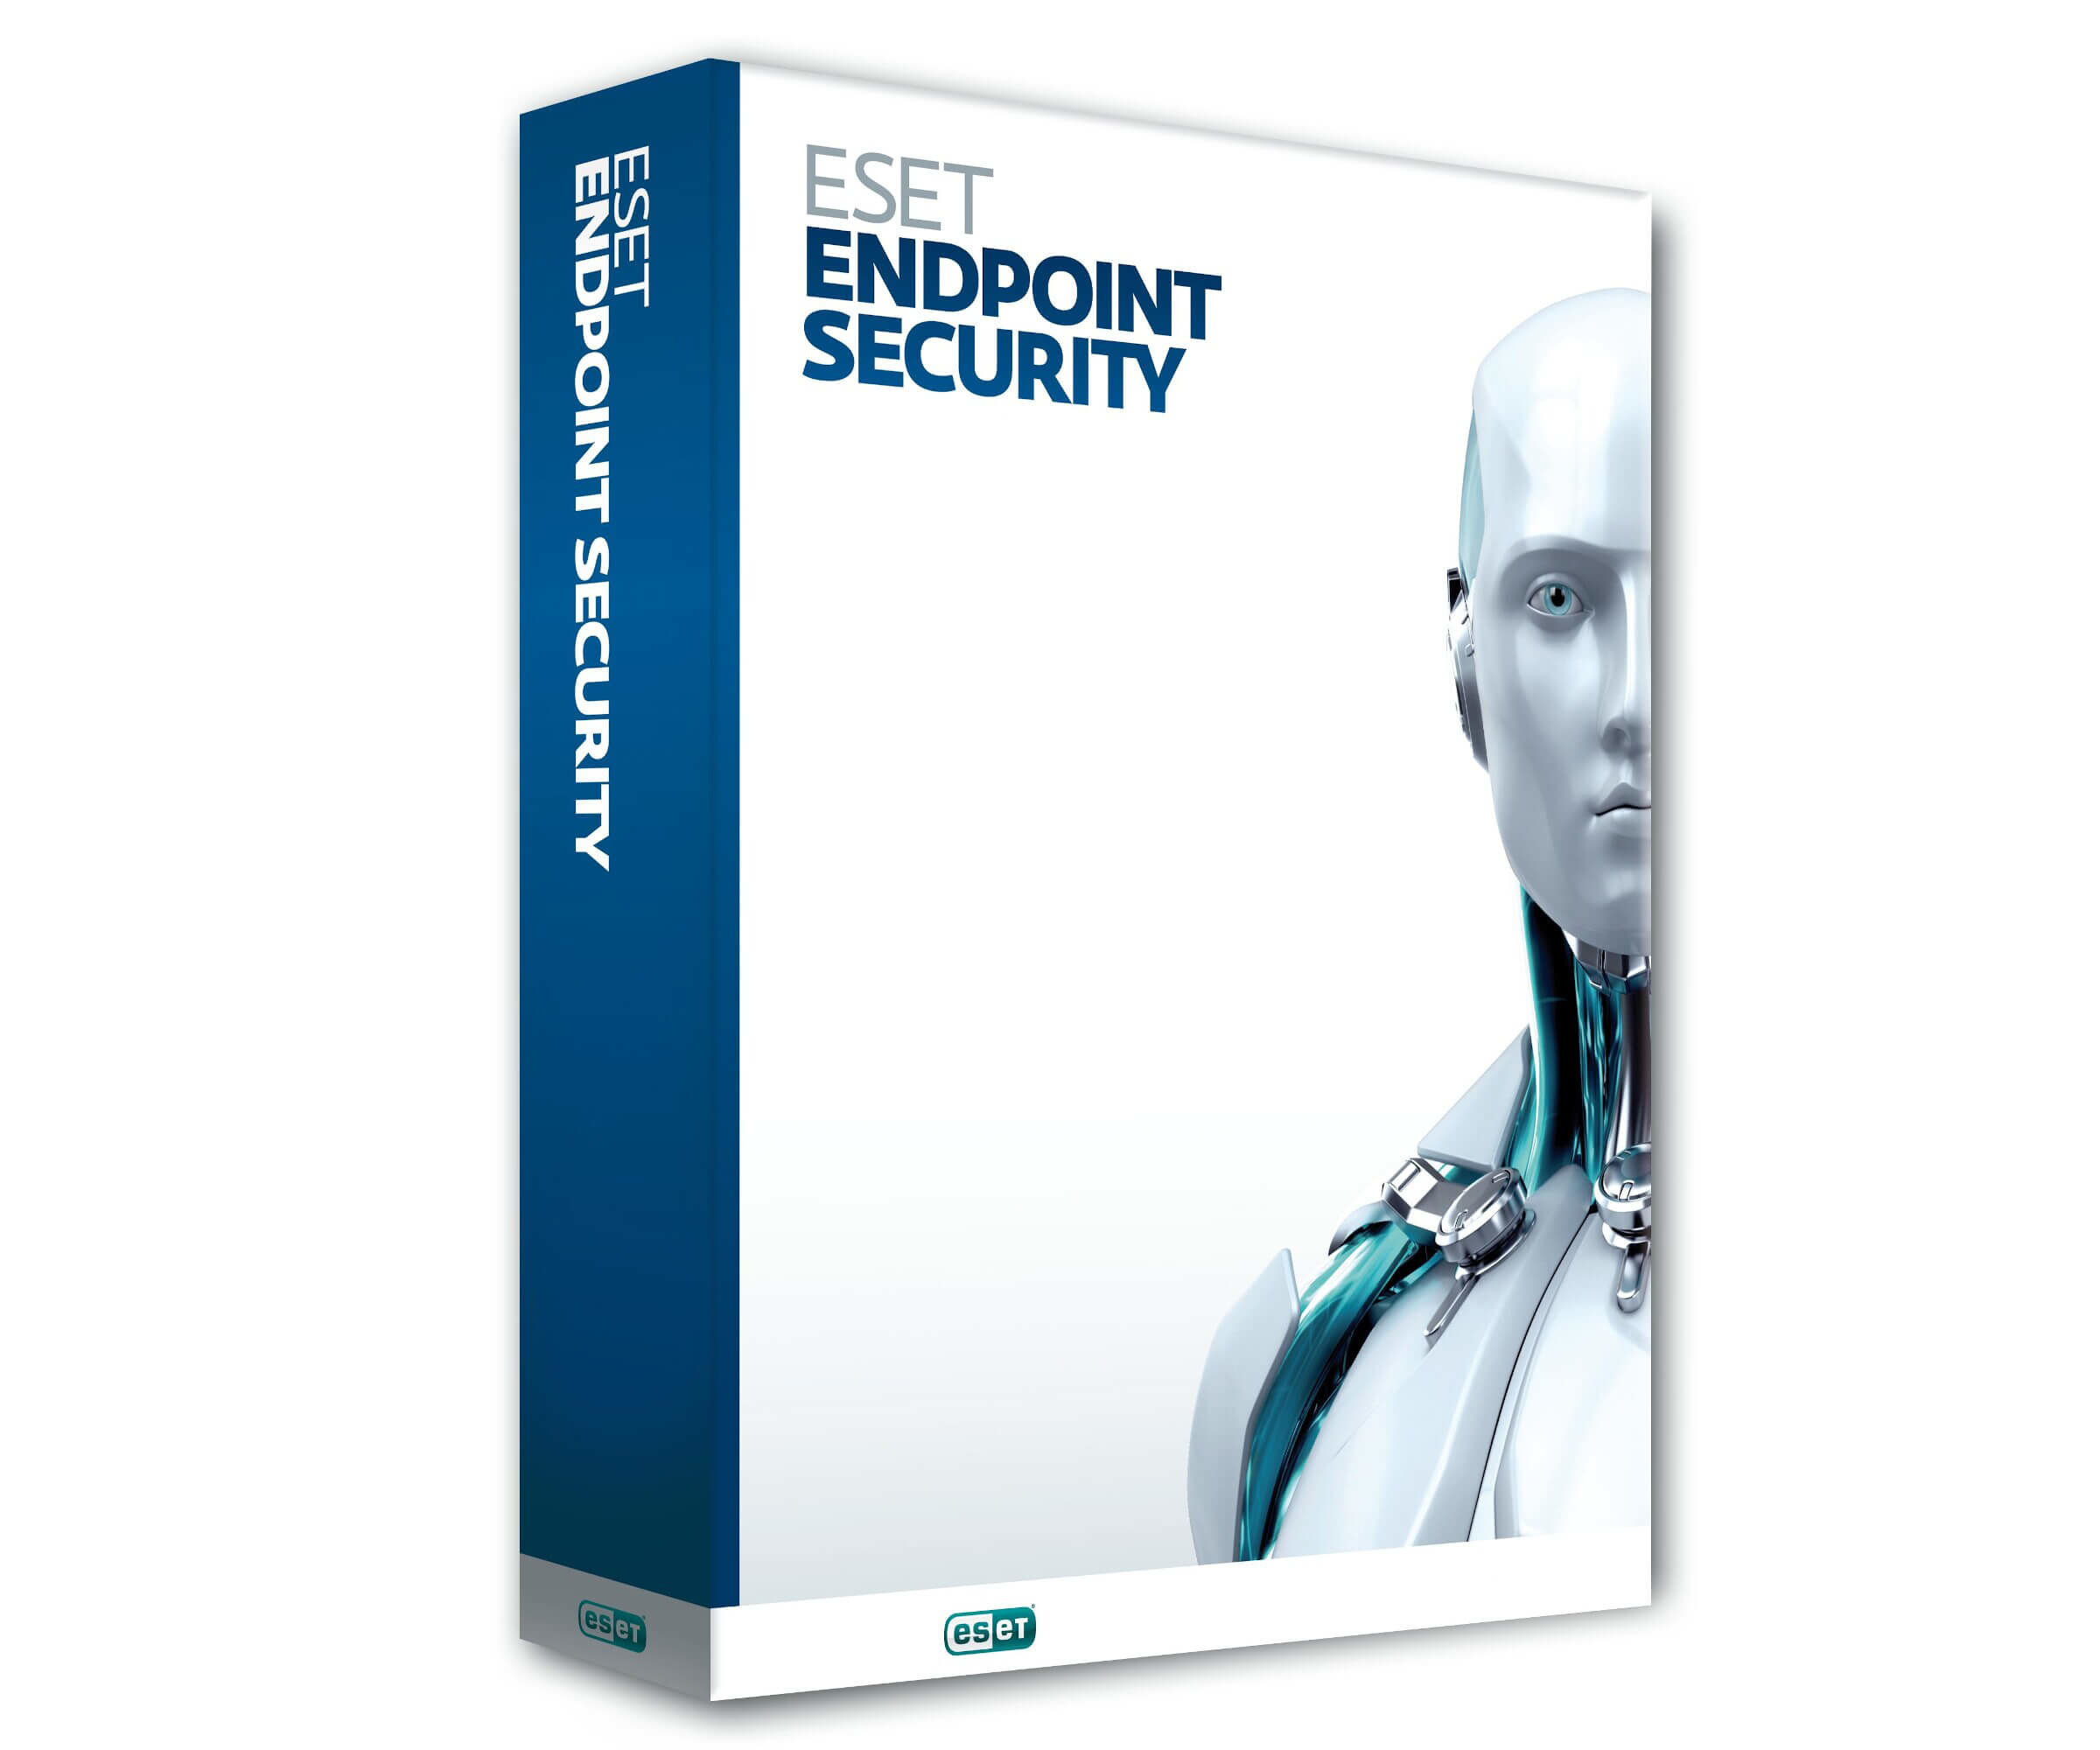 eset endpoint security download mac